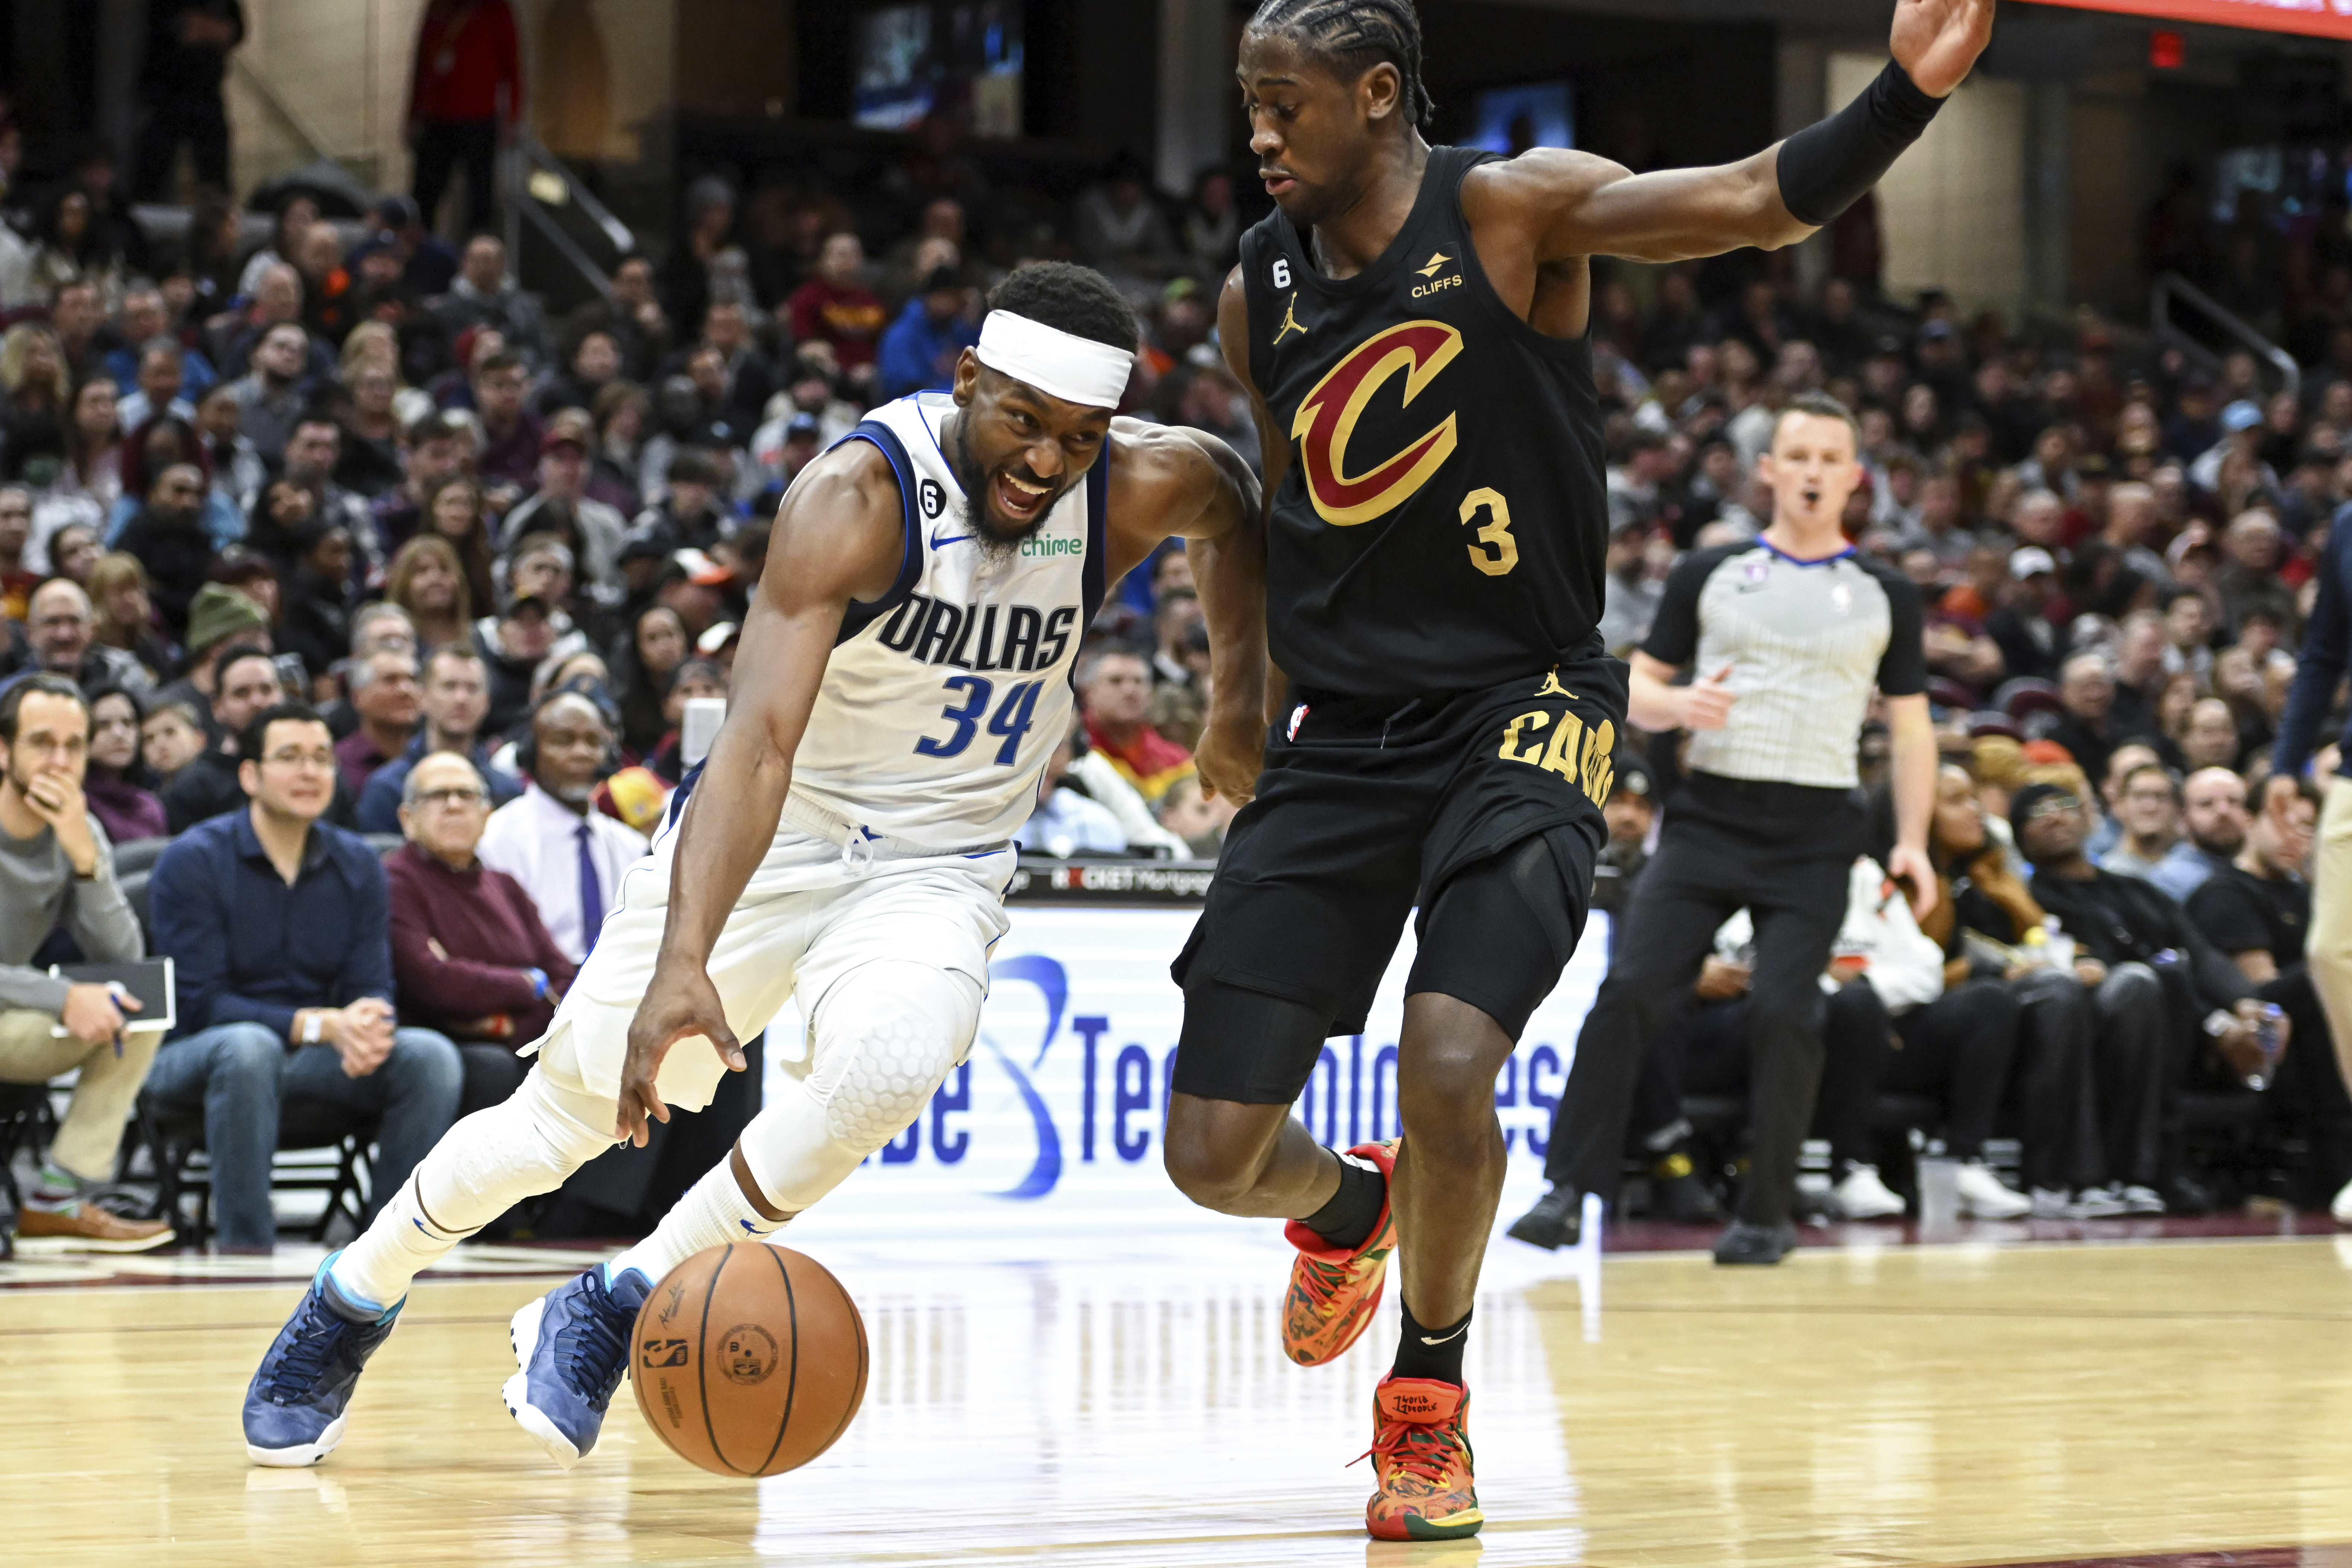 Walker shines in place of as shorthanded Mavs fall in OT to Cavaliers